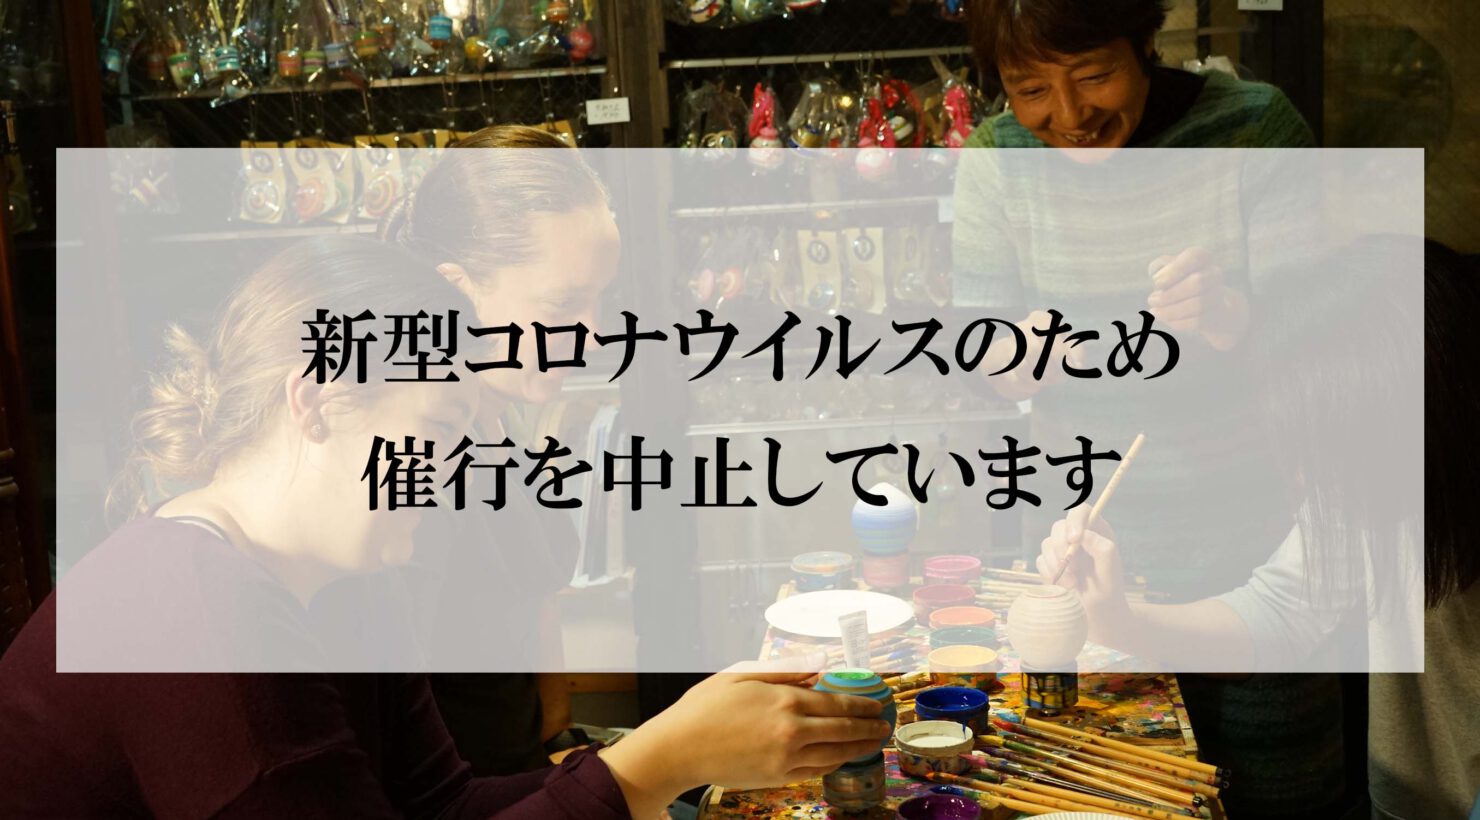 Sasebo Top　Painting Experience & Spinning Experience